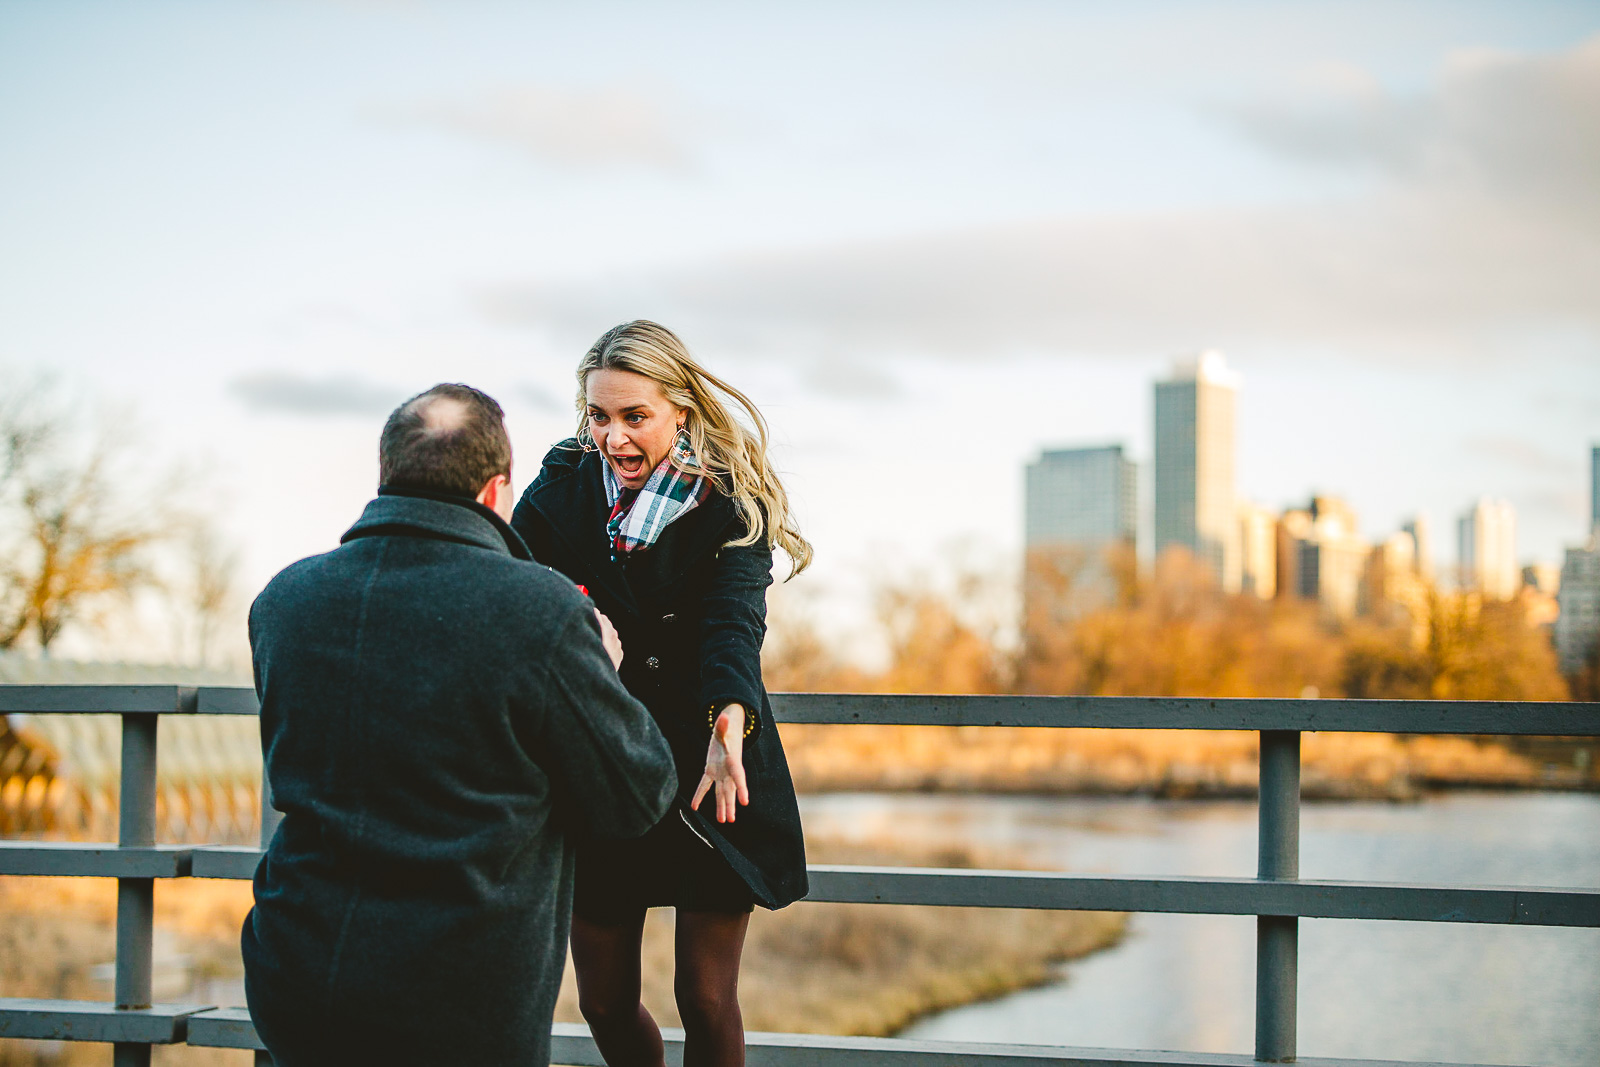 05 photographer for proposal - Zach + Staci // Chicago Proposal